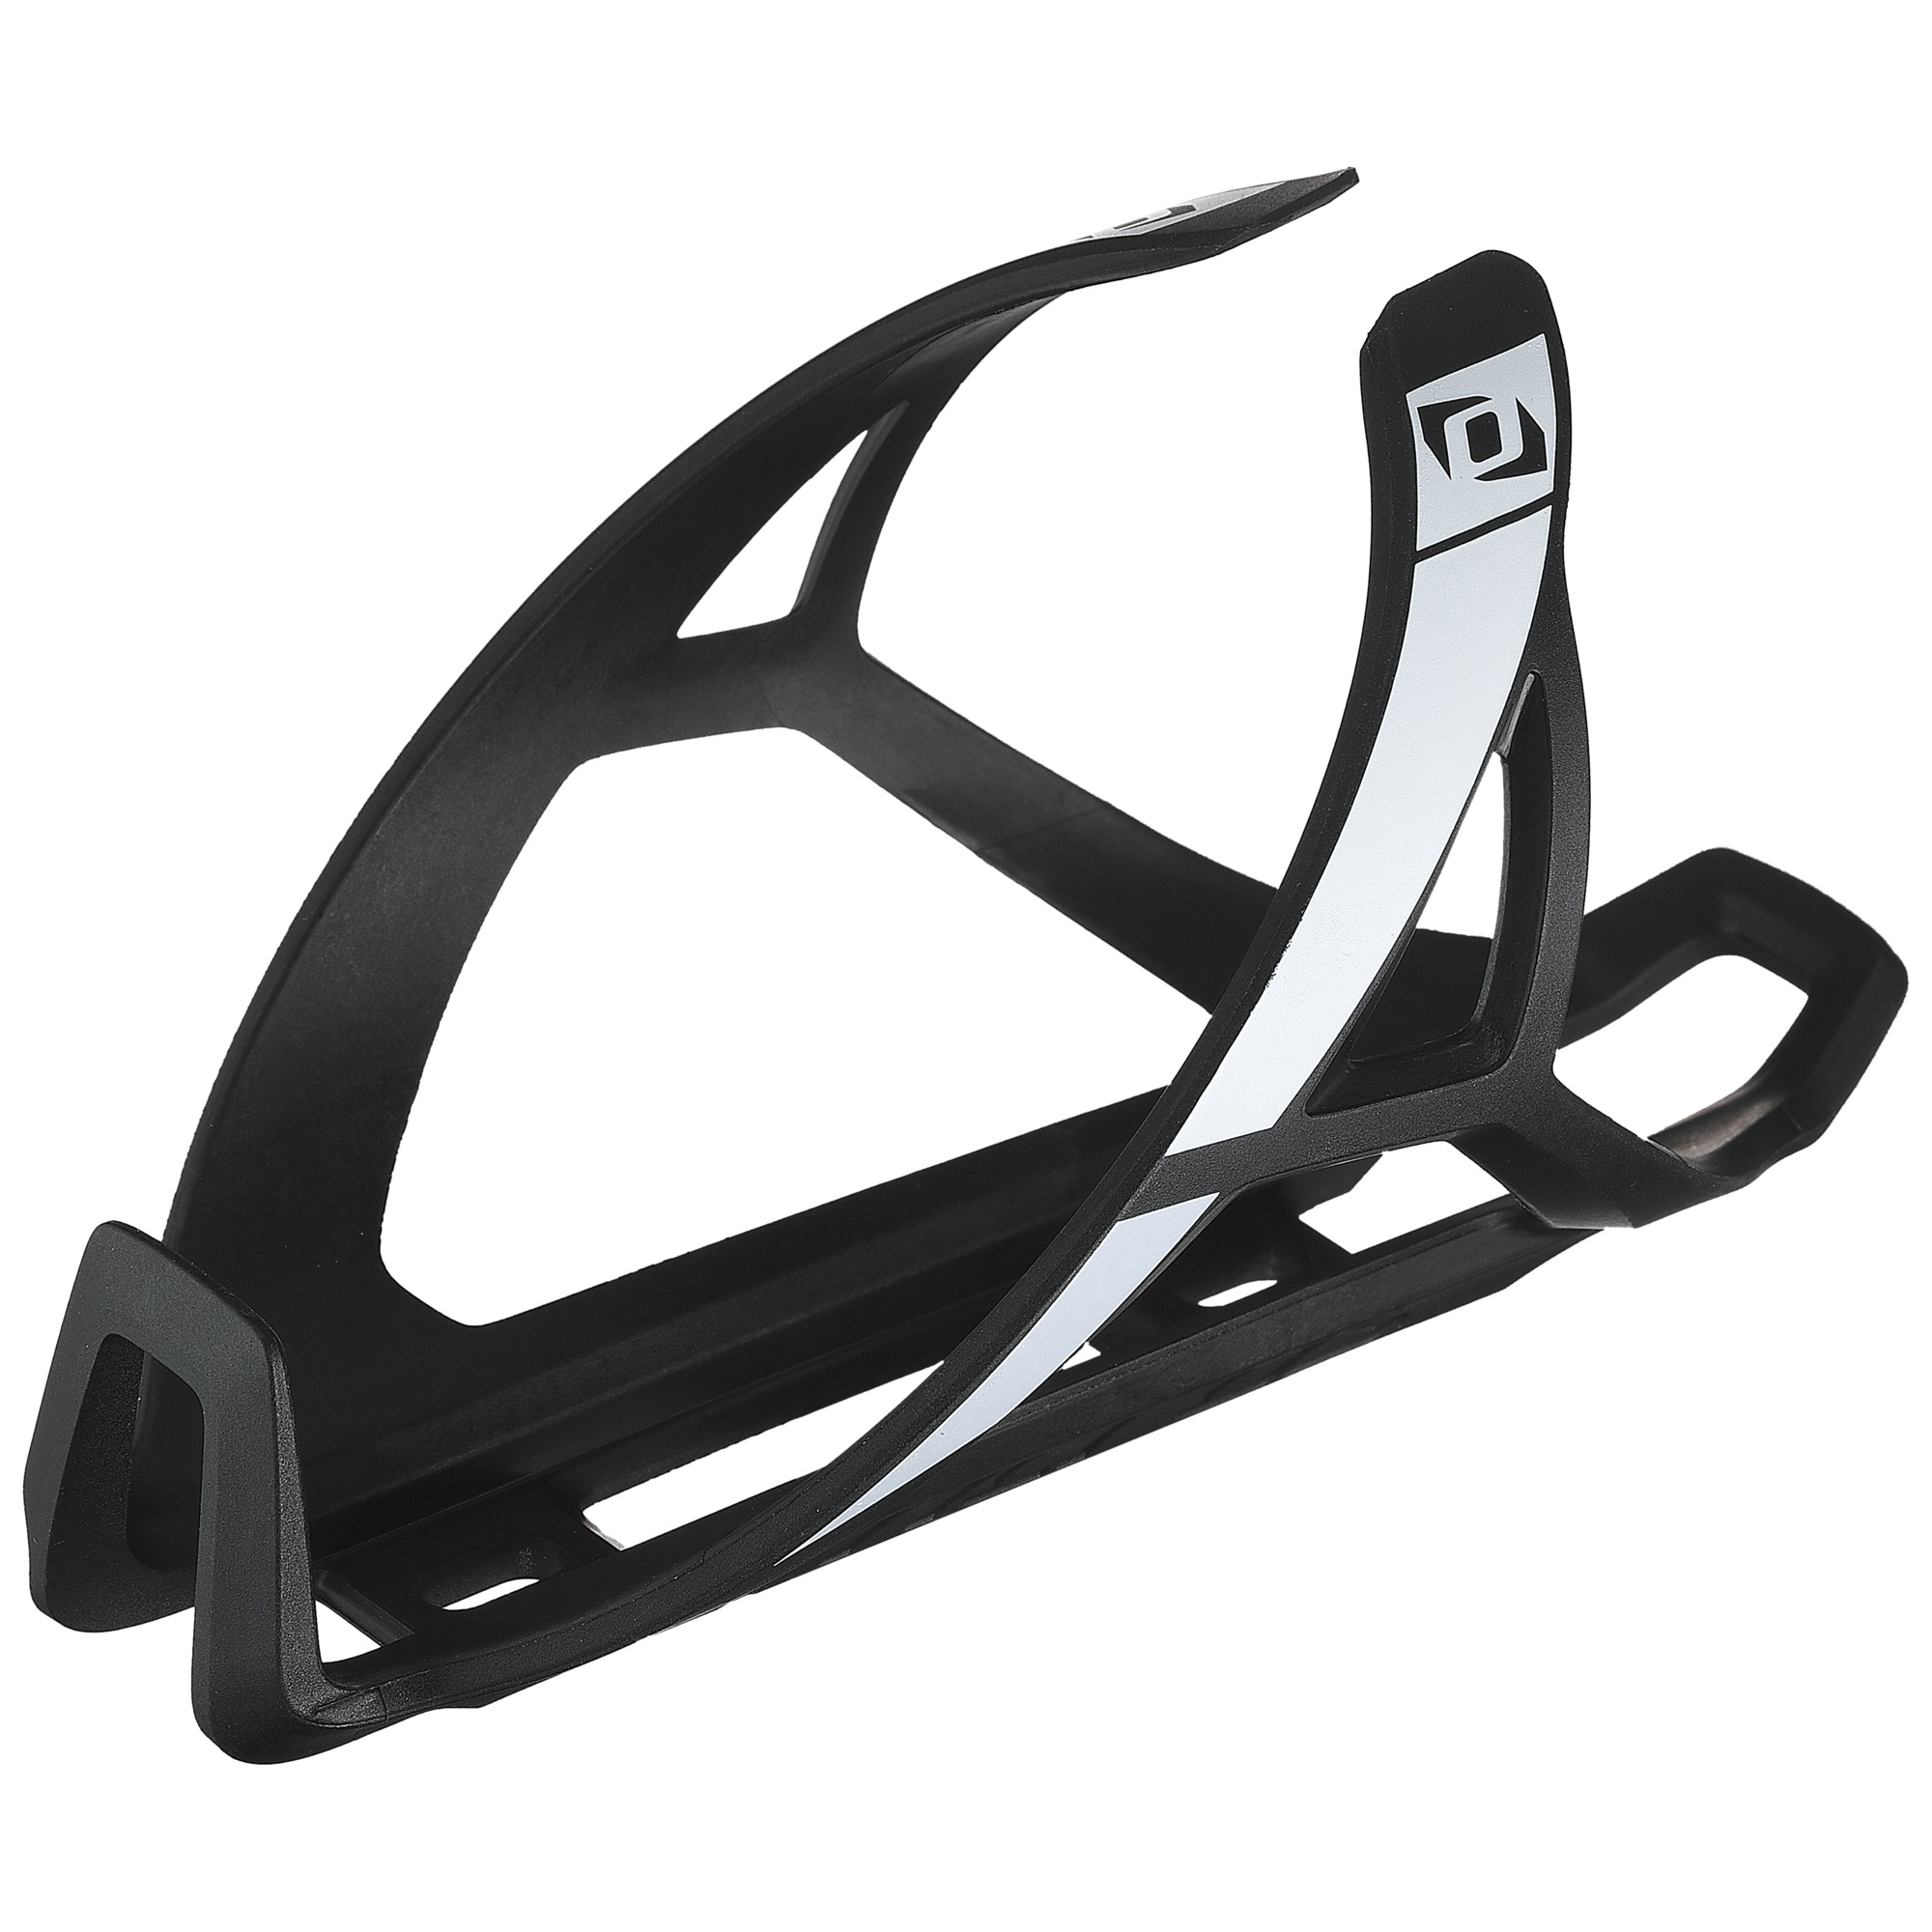 Syncros Comp 2.0 Bottle Cage